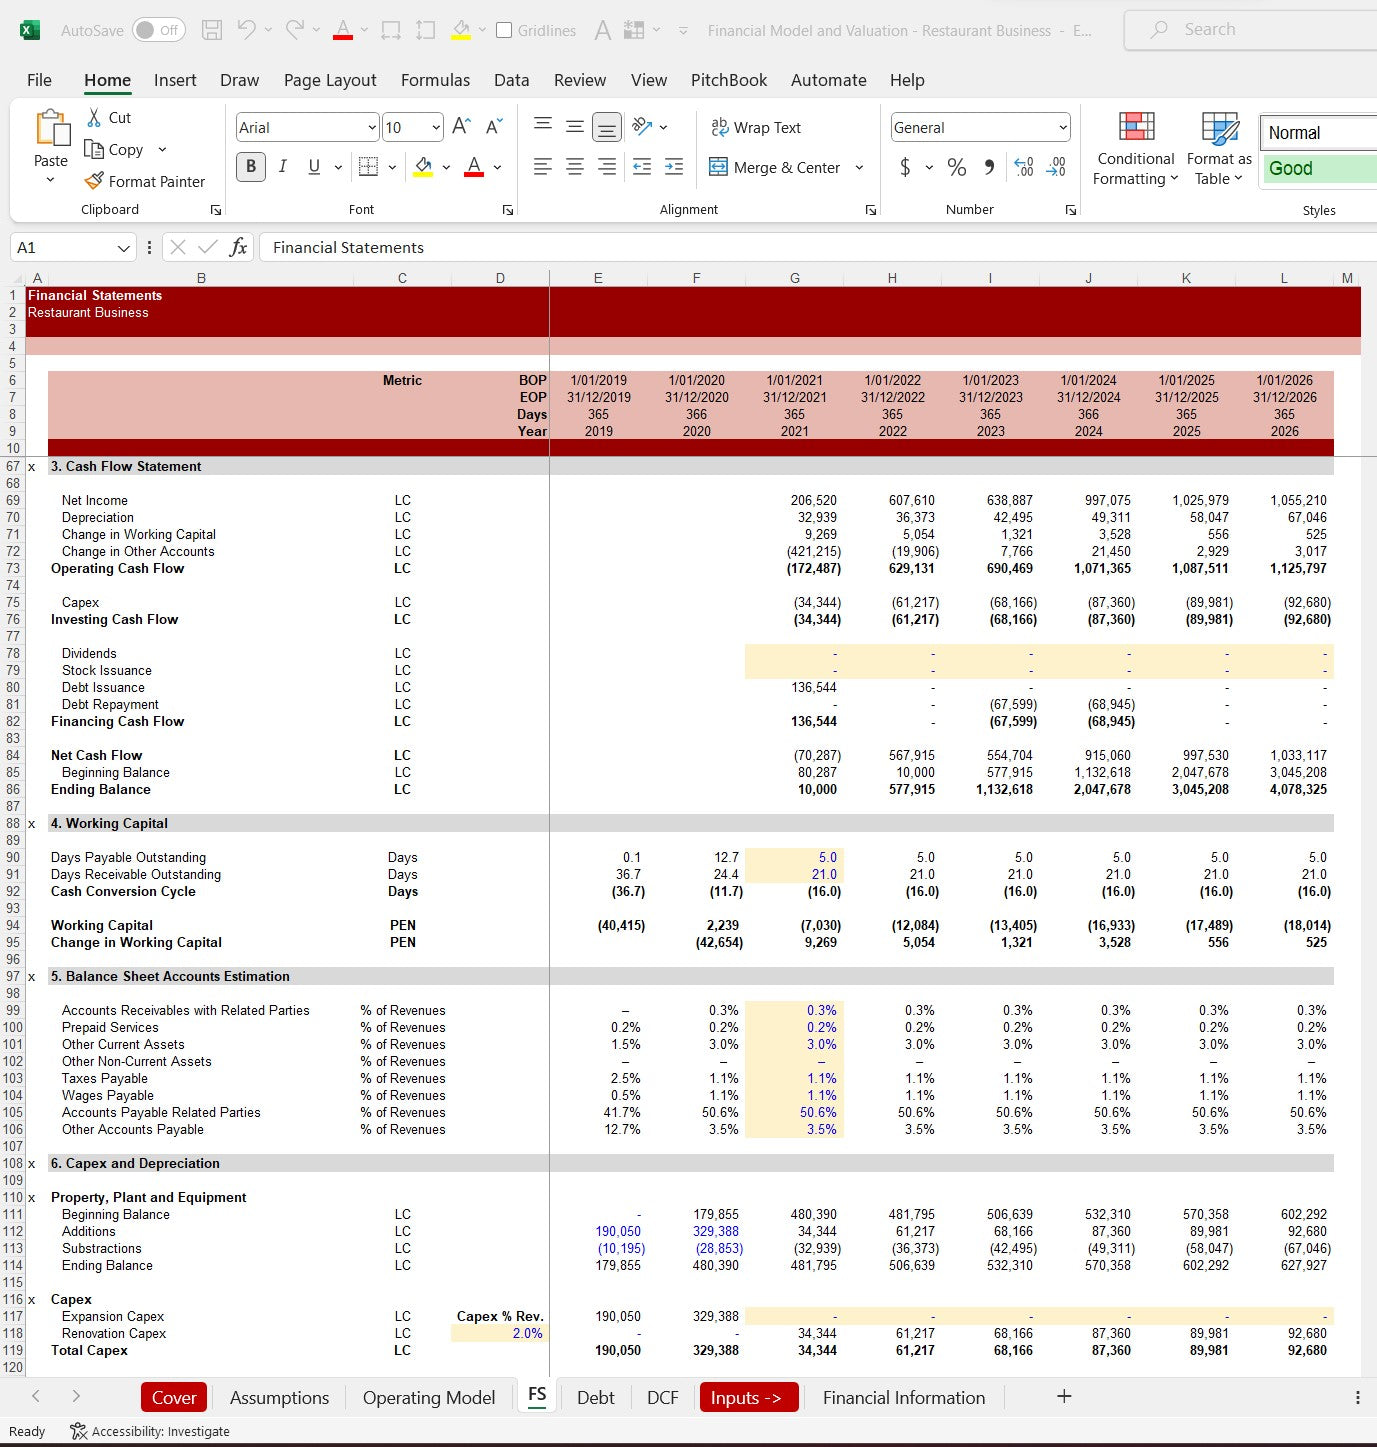 Restaurant Financial Model and Valuation Excel Spreadsheet Template. Cash Flow projections snip